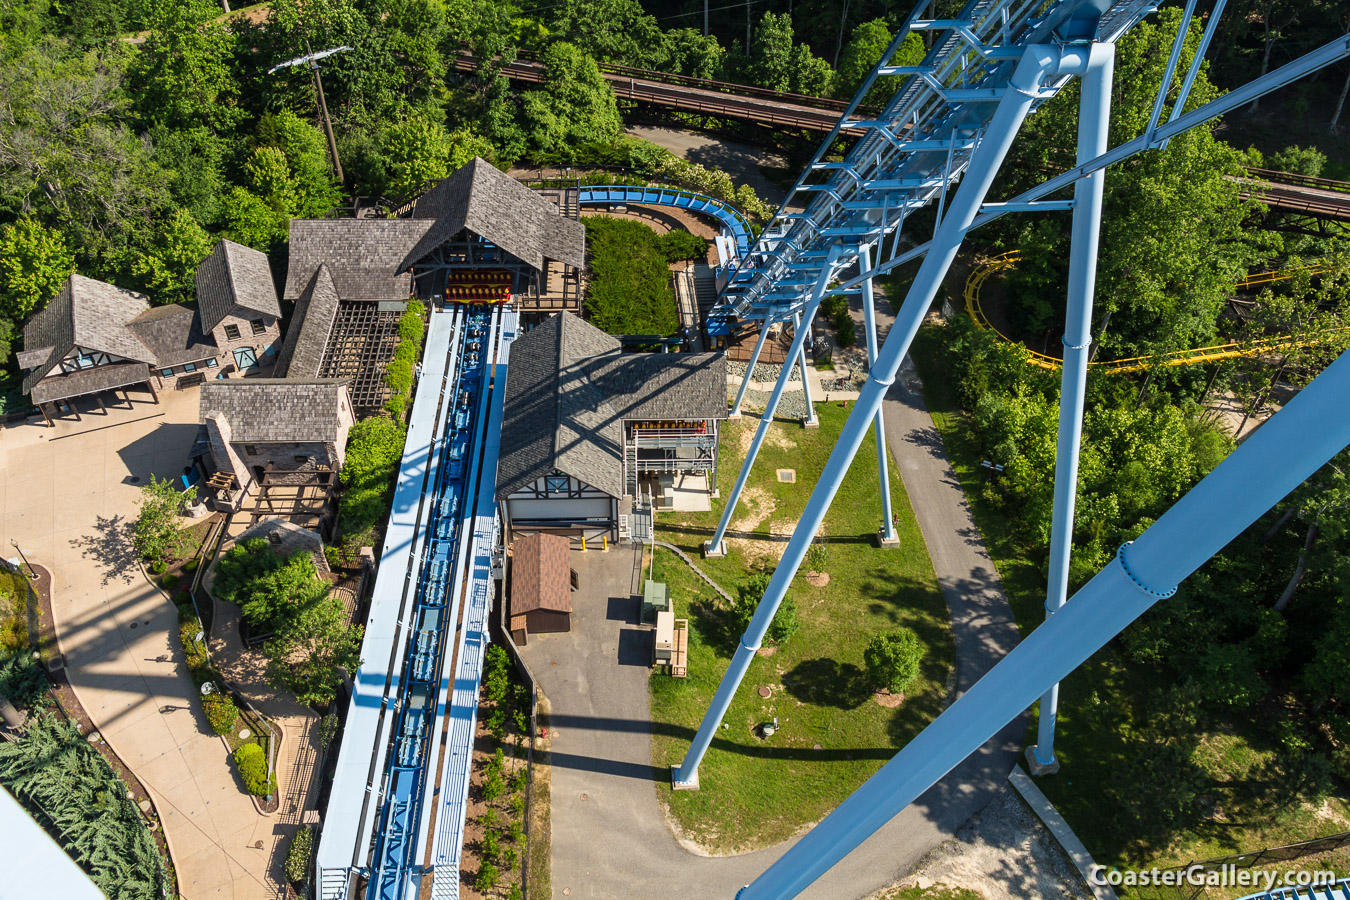 Griffon roller coaster pictures